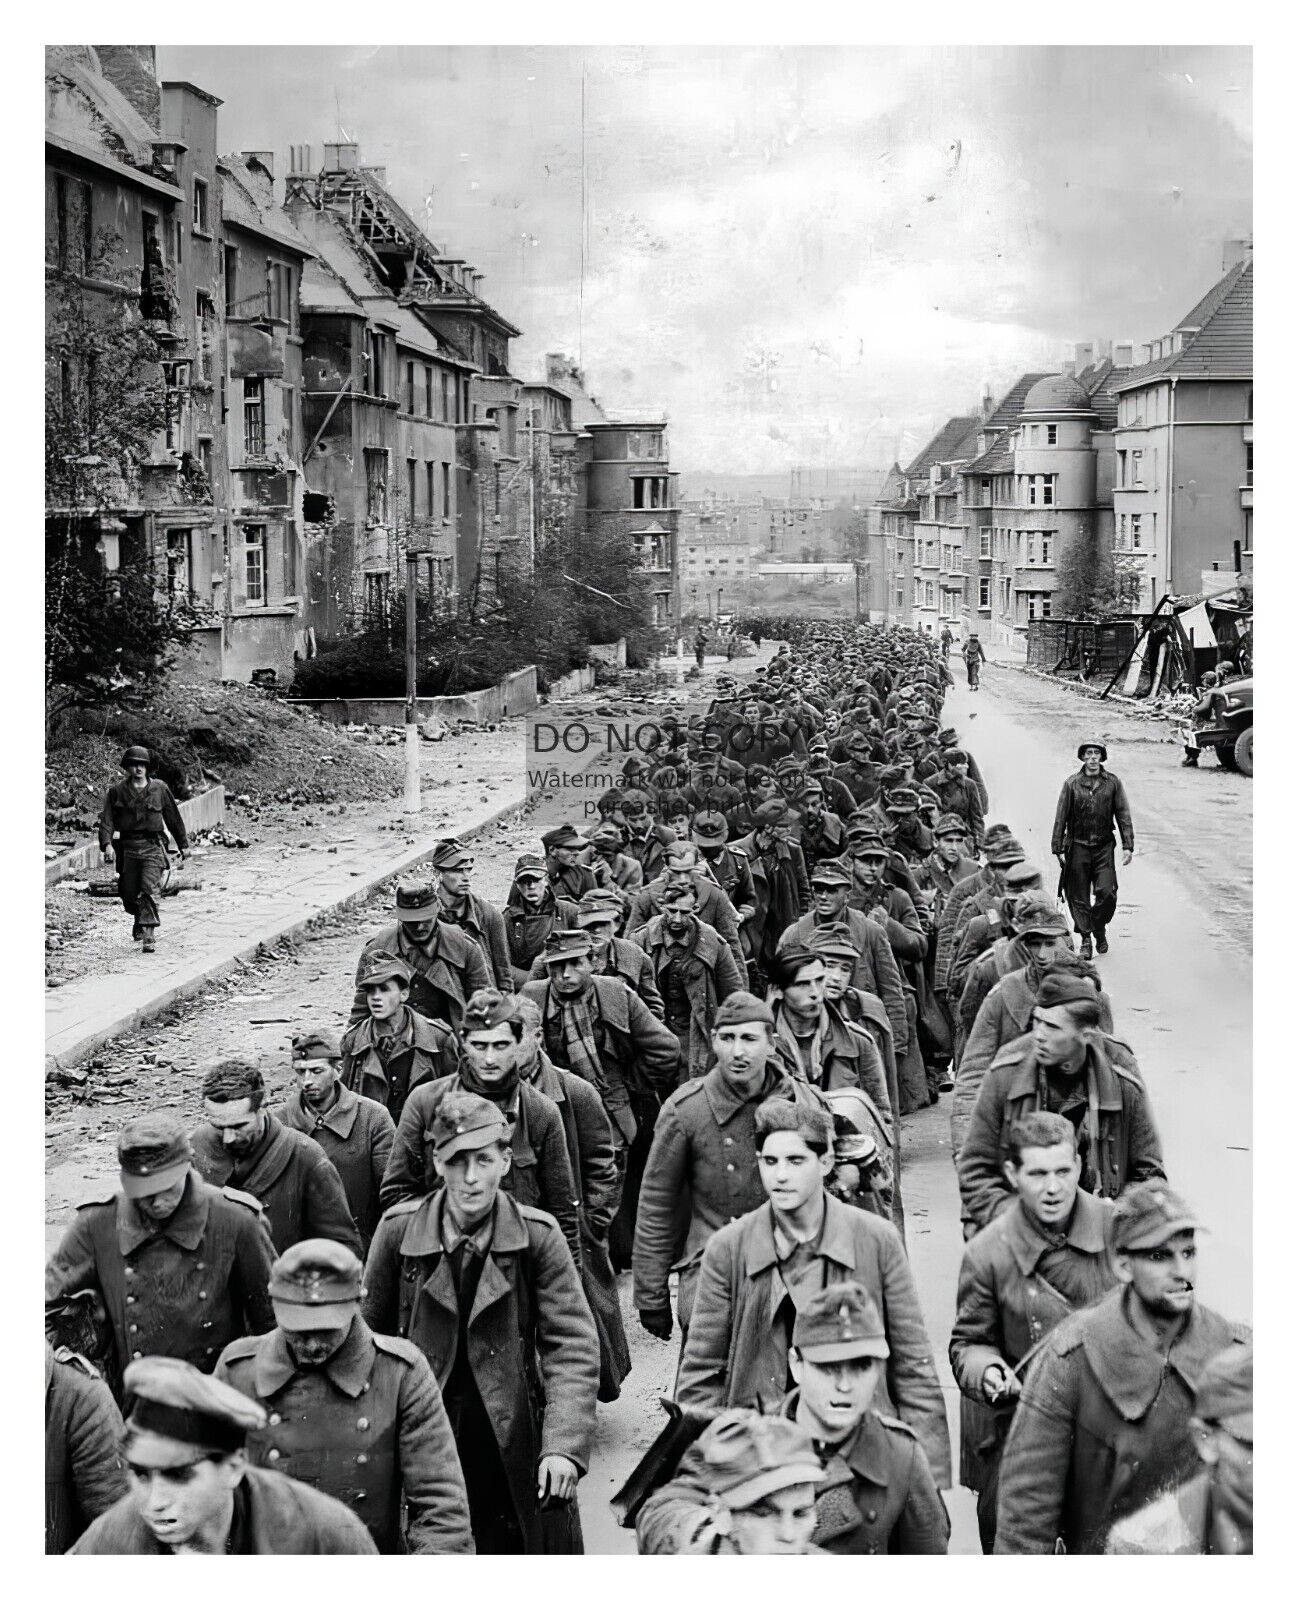 GERMAN PRISONERS OF WAR POW BEING MARCHED THROUGH THE CITY STREET 8X10 PHOTO